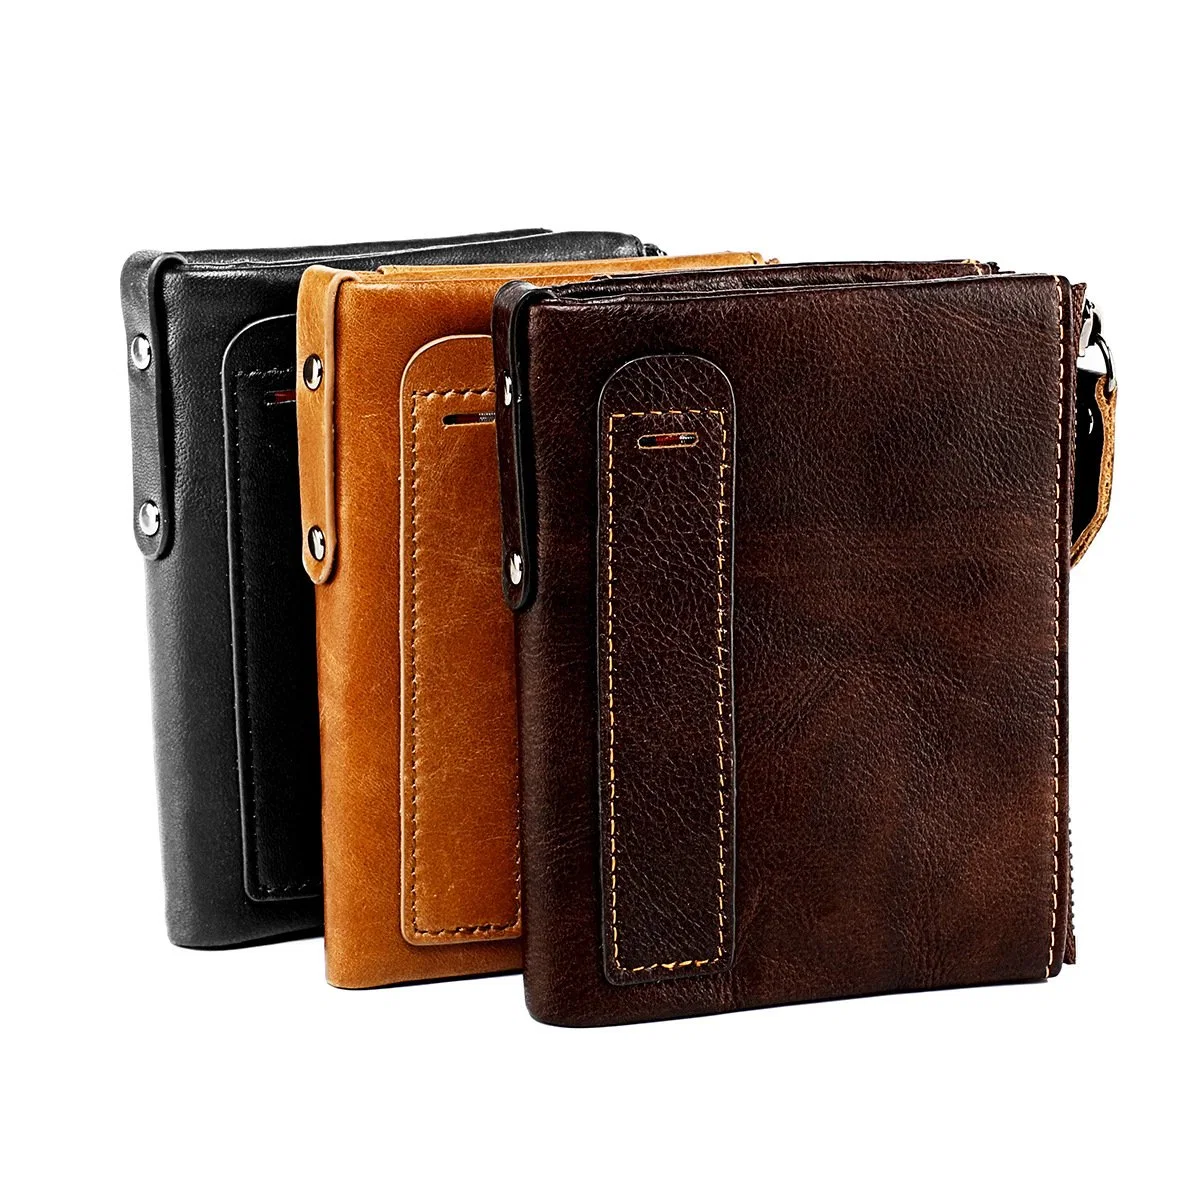 Low MOQ High Quality Leather Classic Man and Women Wallet Leather Slim Card Purse Men Money Wallets